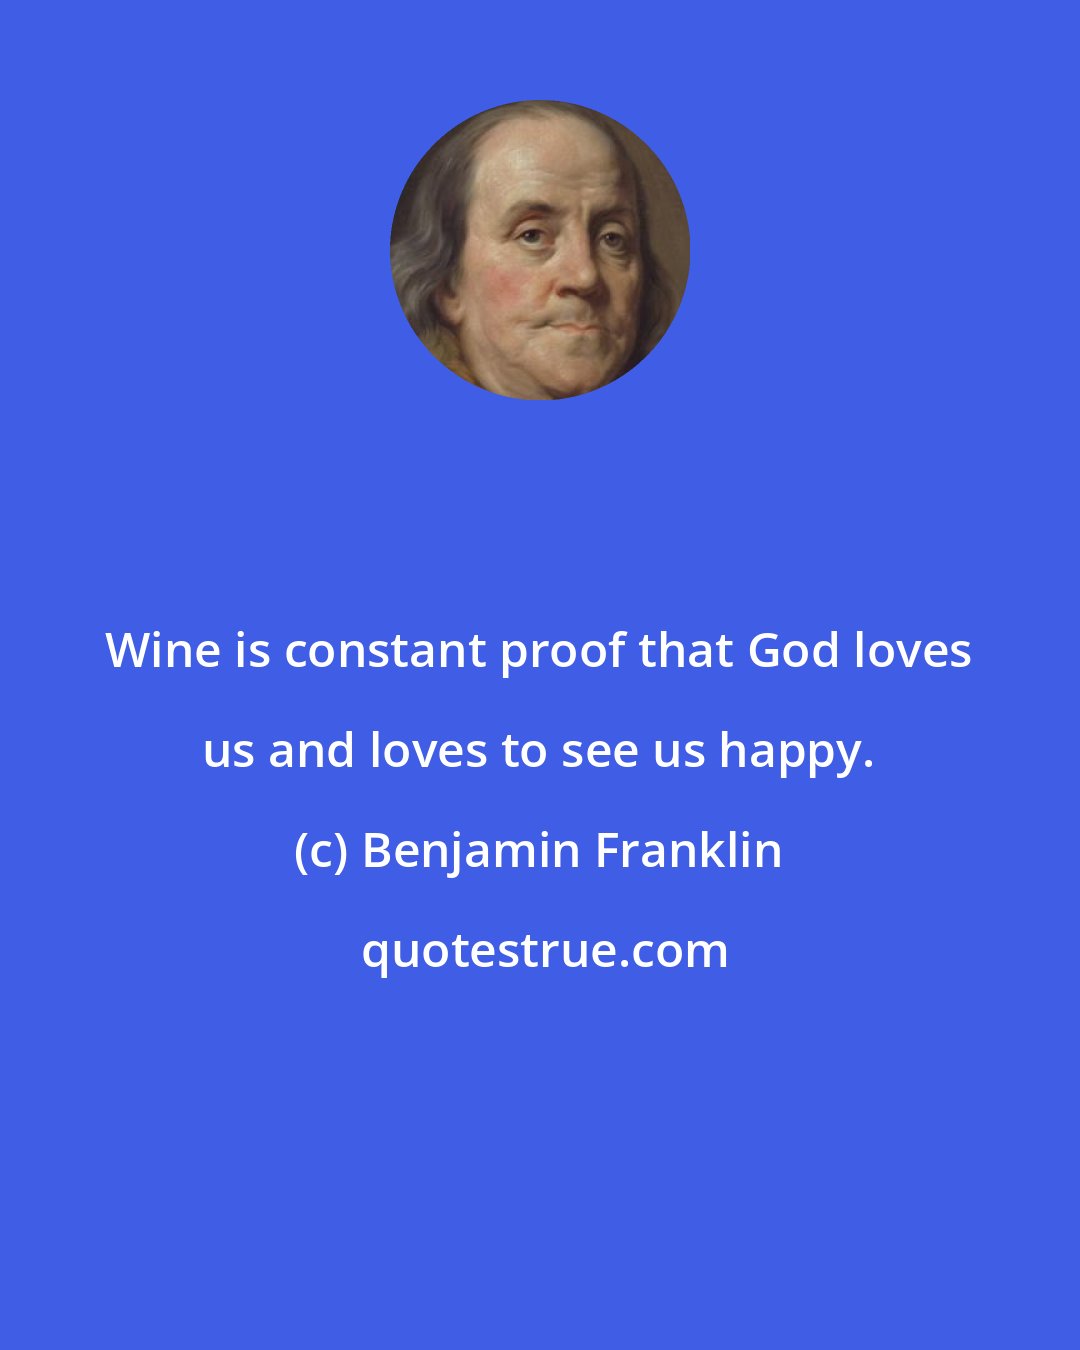 Benjamin Franklin: Wine is constant proof that God loves us and loves to see us happy.